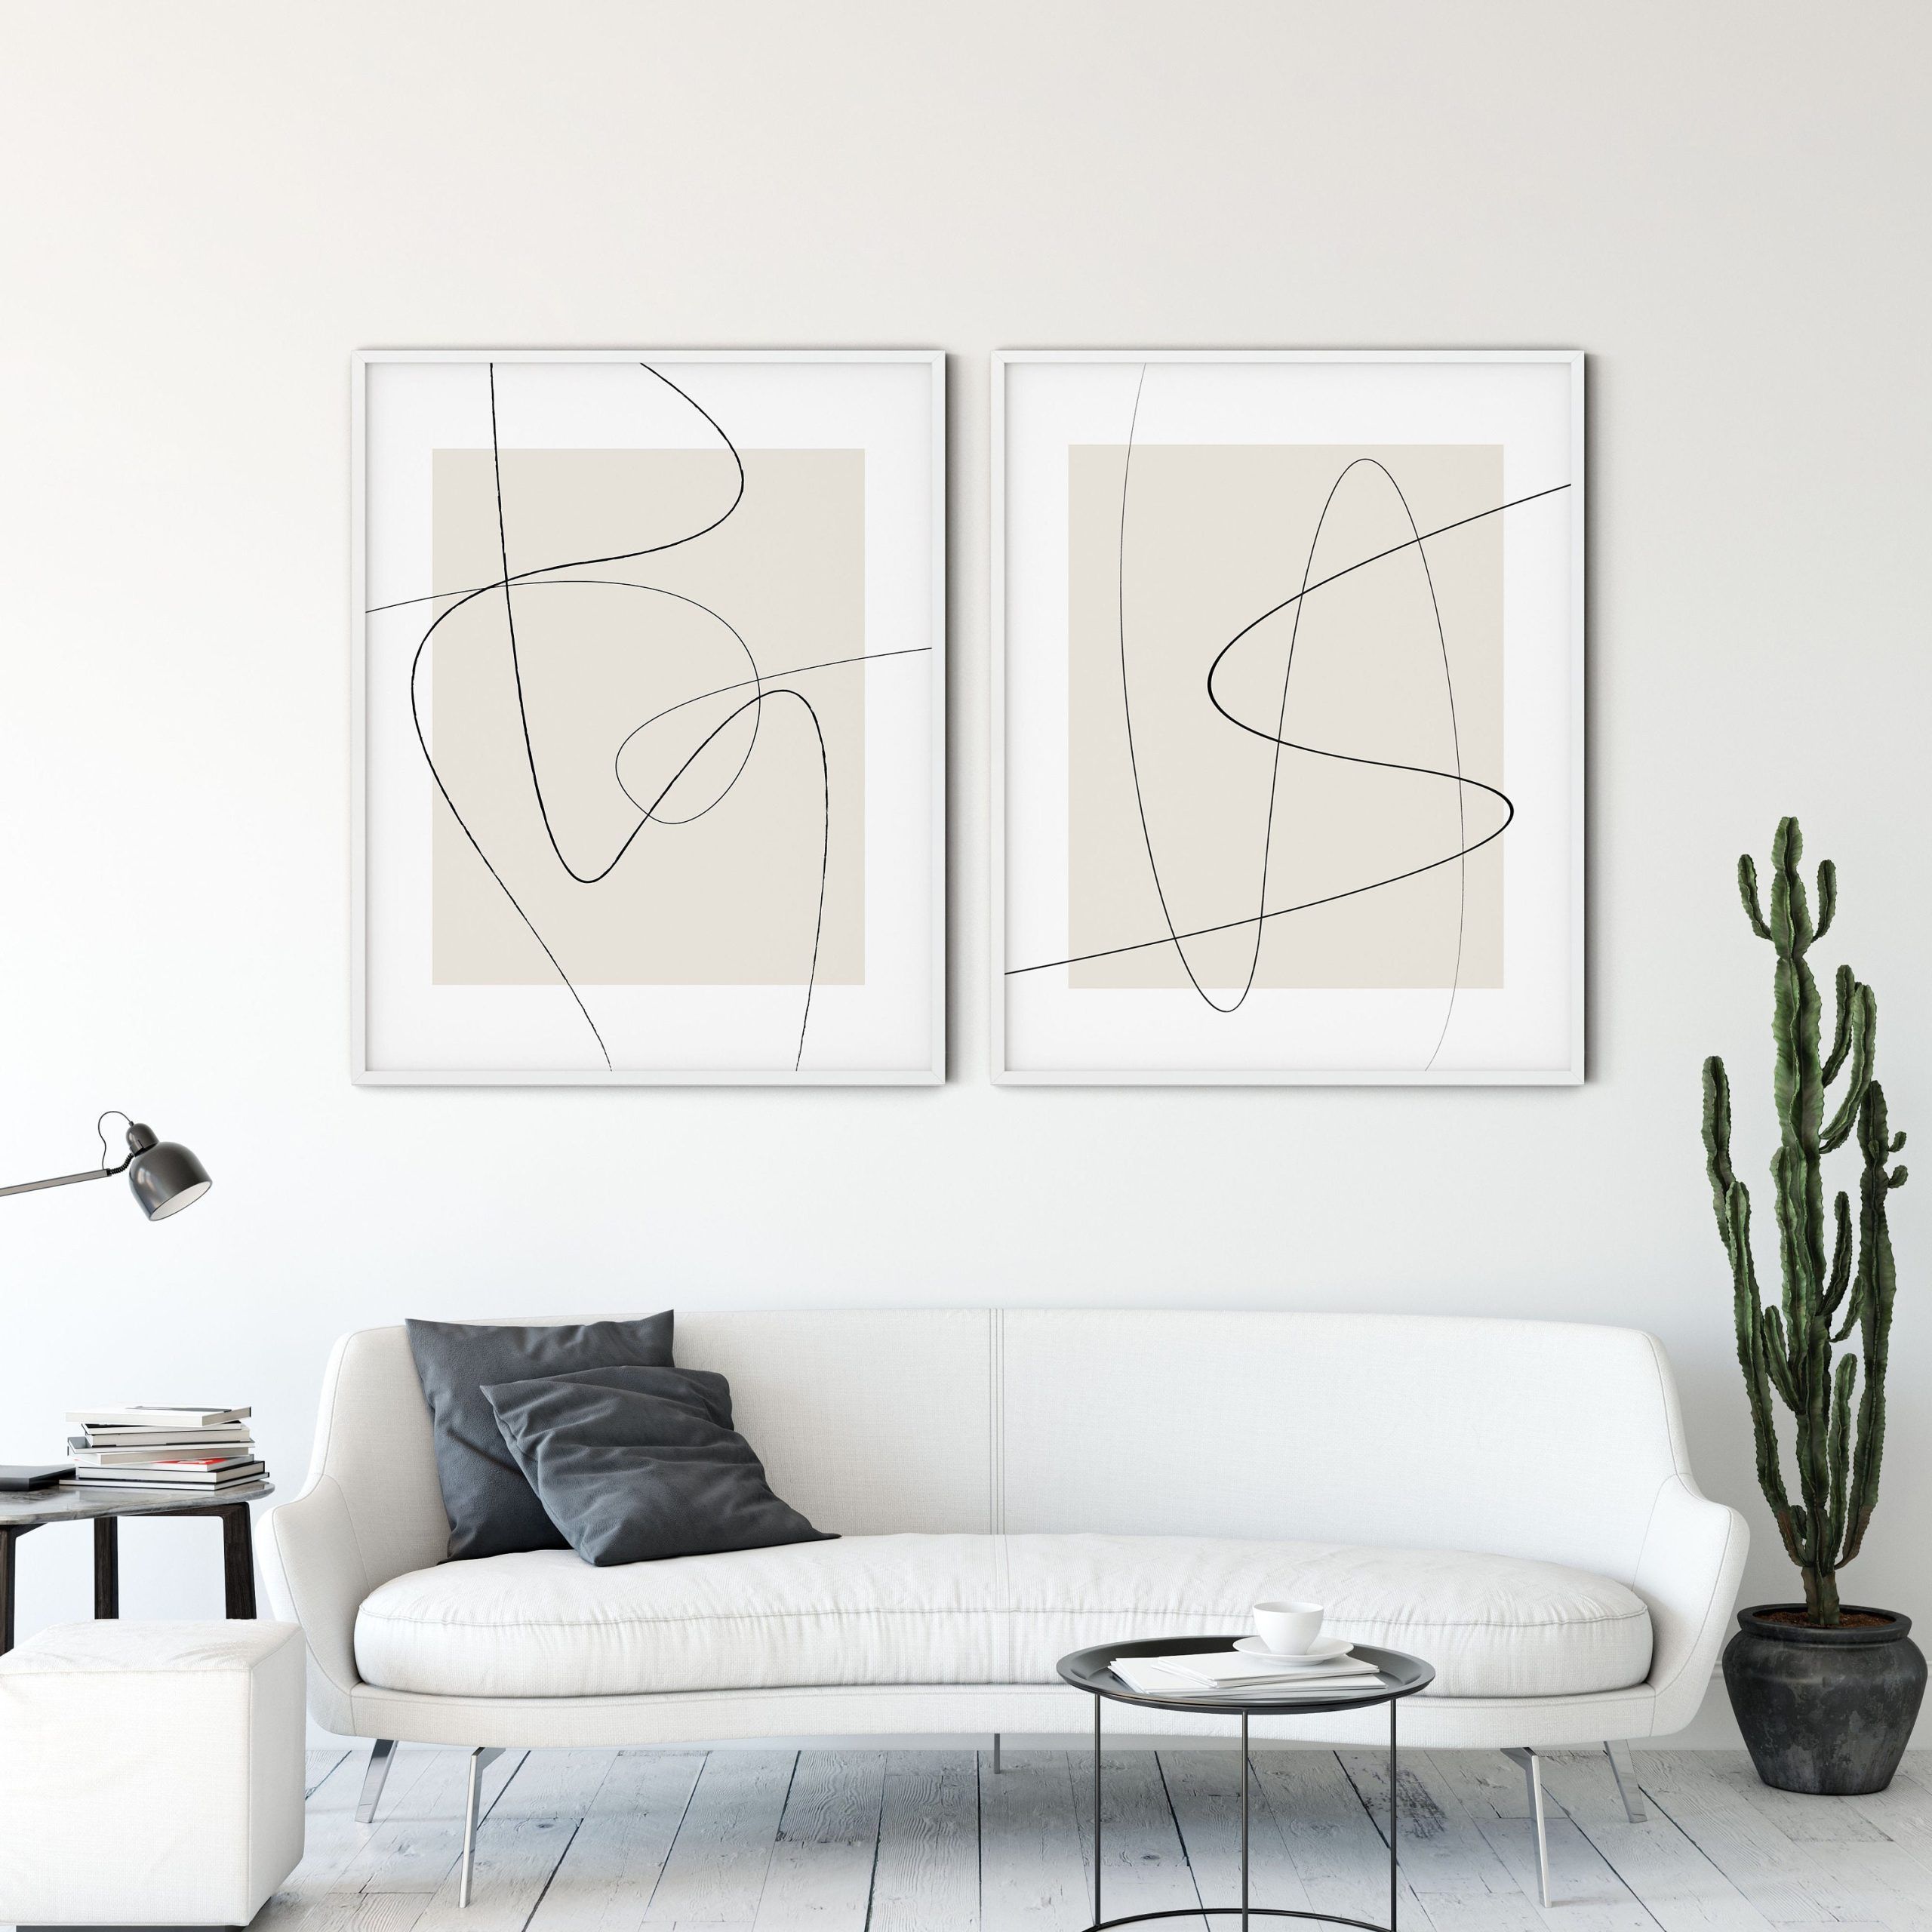 2 Set Picture Extra Large Wall Art Abstract Lines Wall Art – Etsy Throughout Lines Wall Art (View 4 of 15)